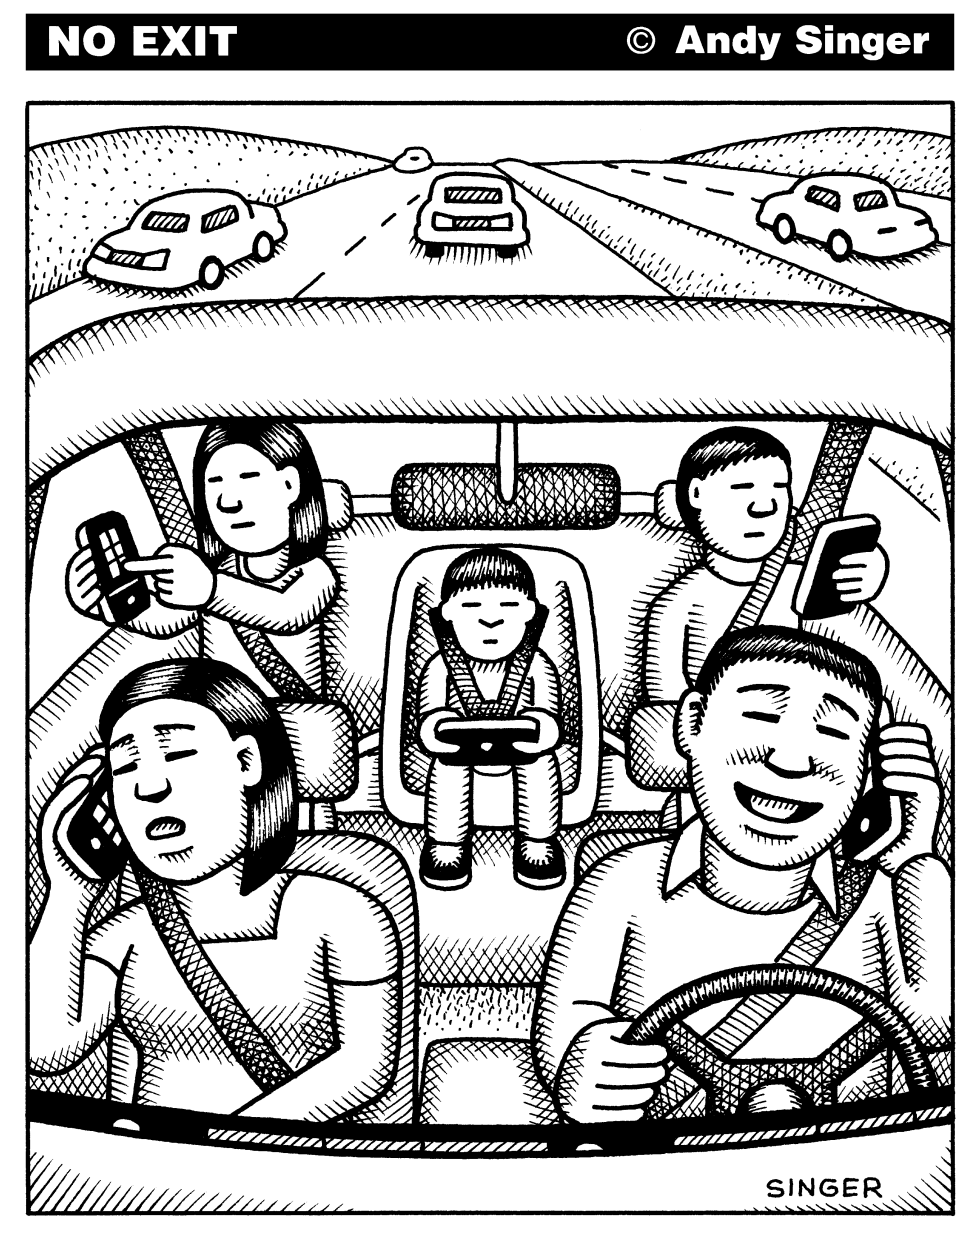 SMART PHONE FAMILY TRIP by Andy Singer